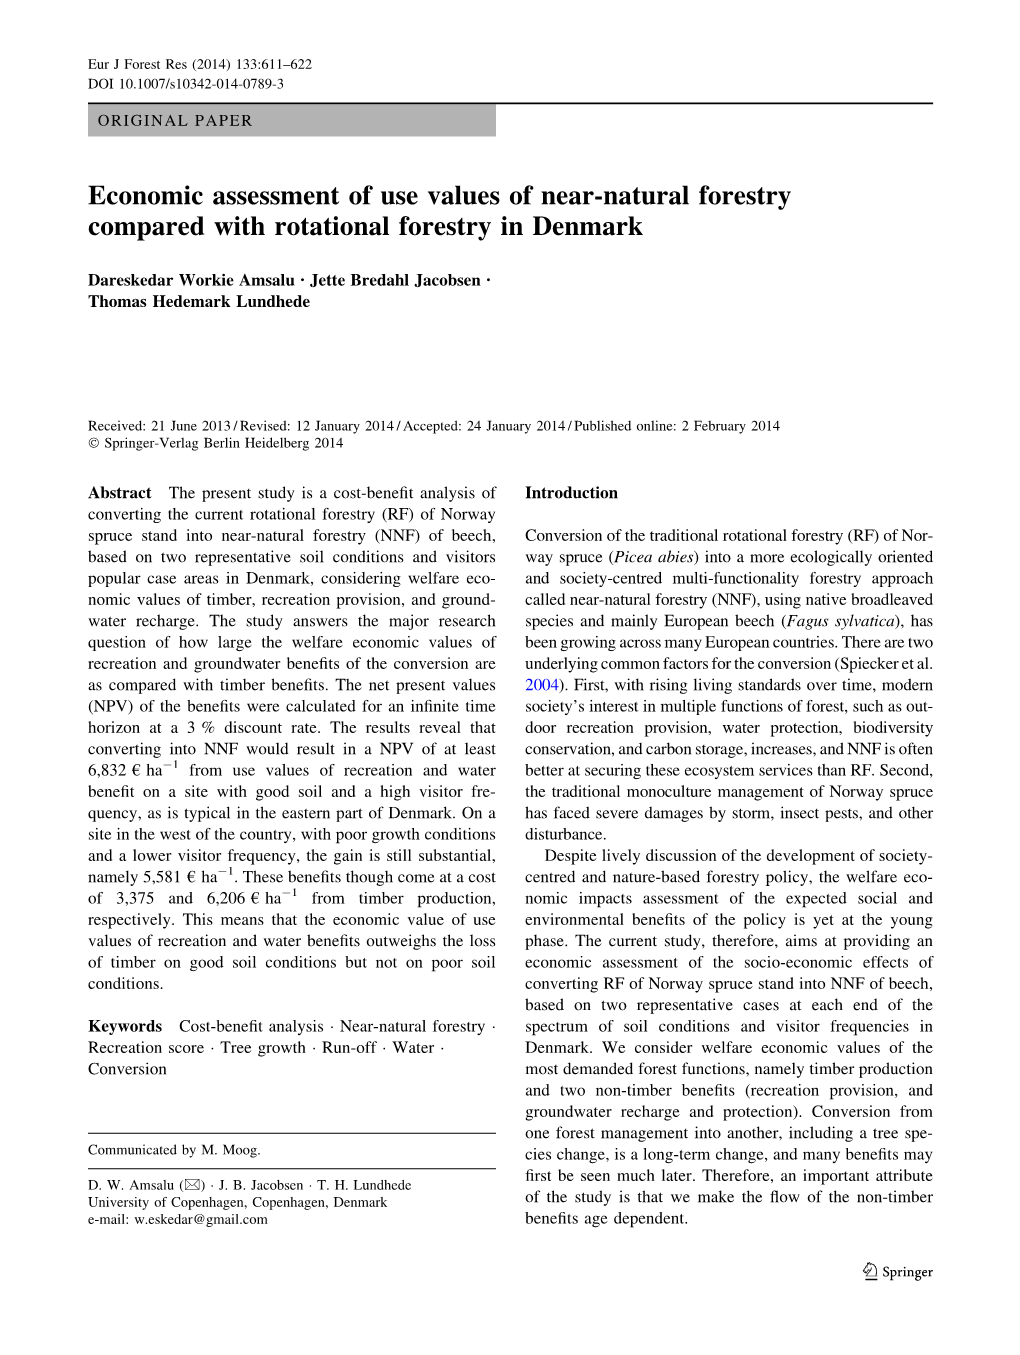 Economic Assessment of Use Values of Near-Natural Forestry Compared with Rotational Forestry in Denmark